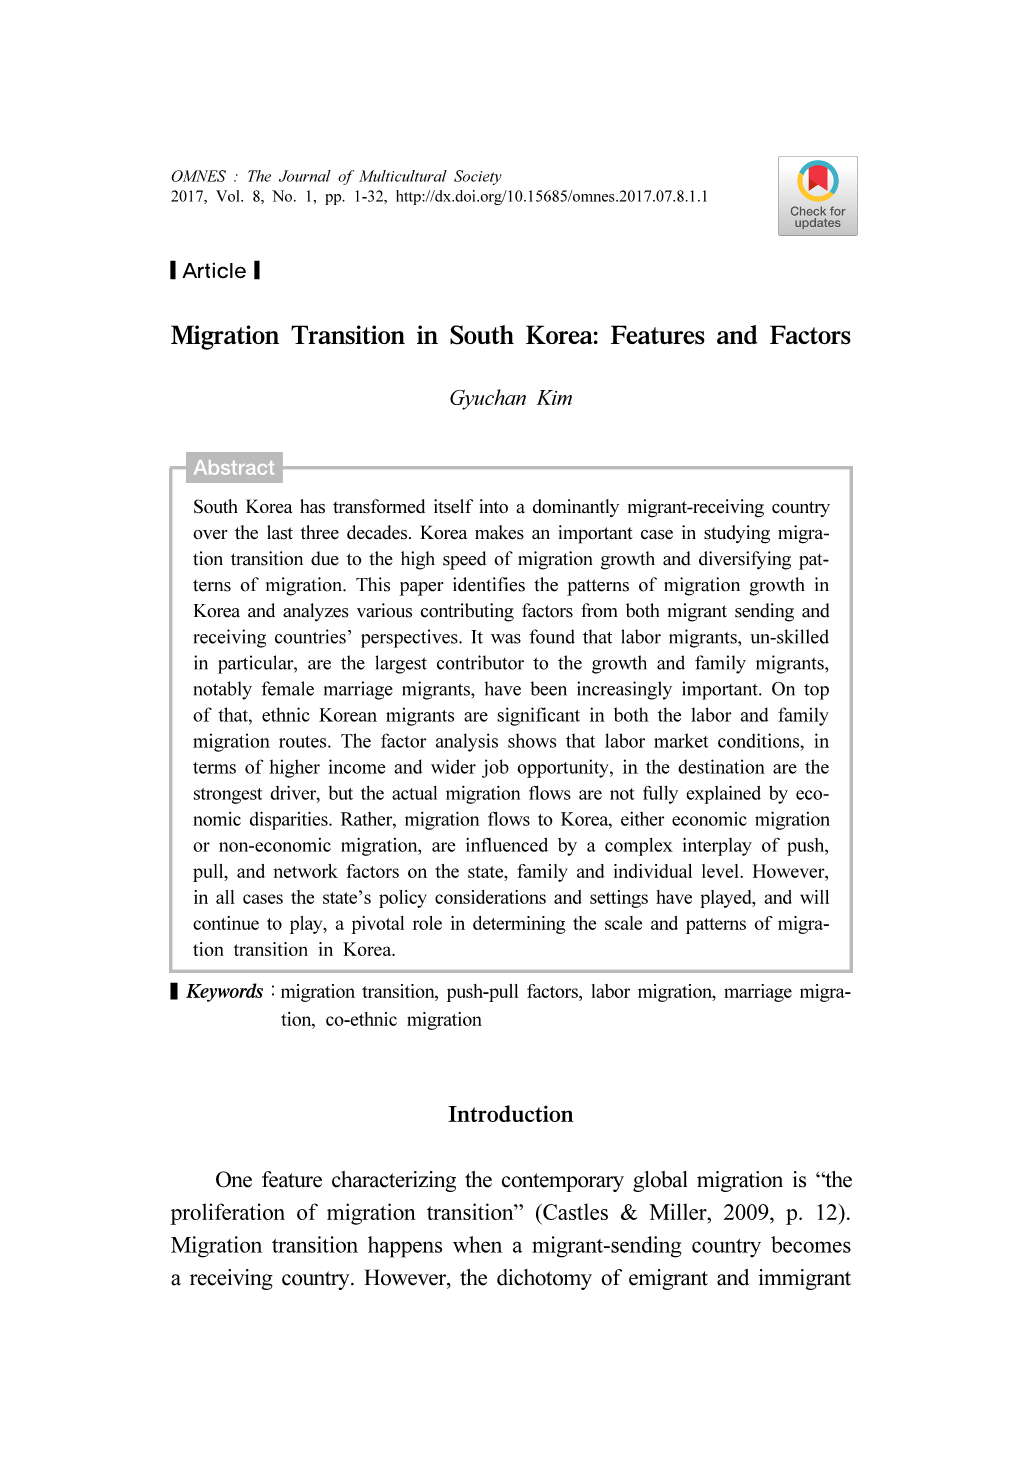 Migration Transition in South Korea: Features and Factors